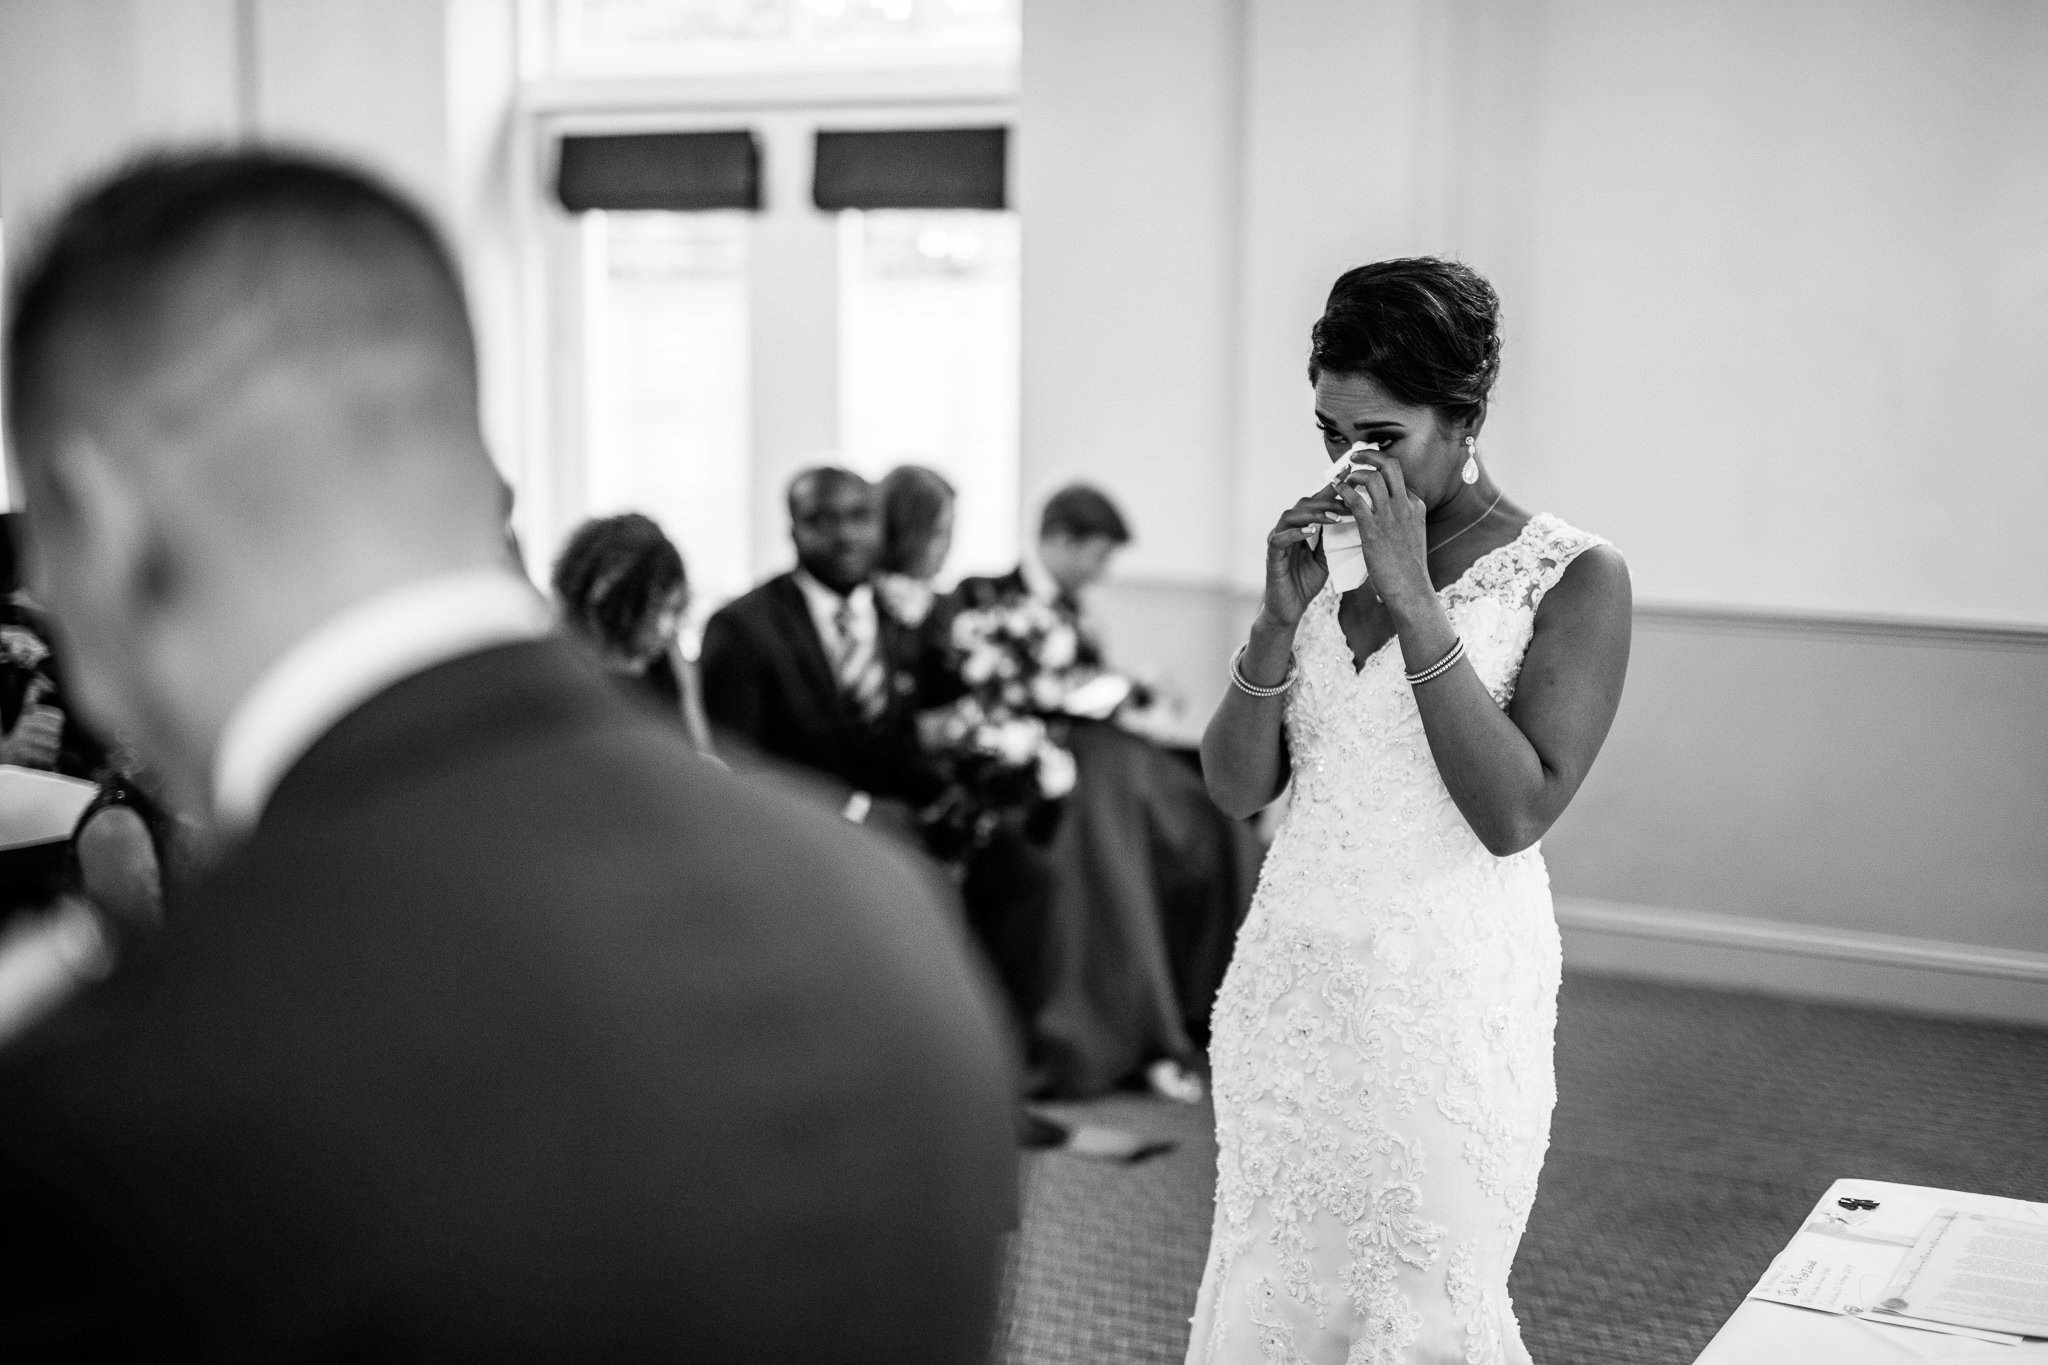  Bride wiping away a tear during the wedding ceremony at Coulsdon Manor Hotel 